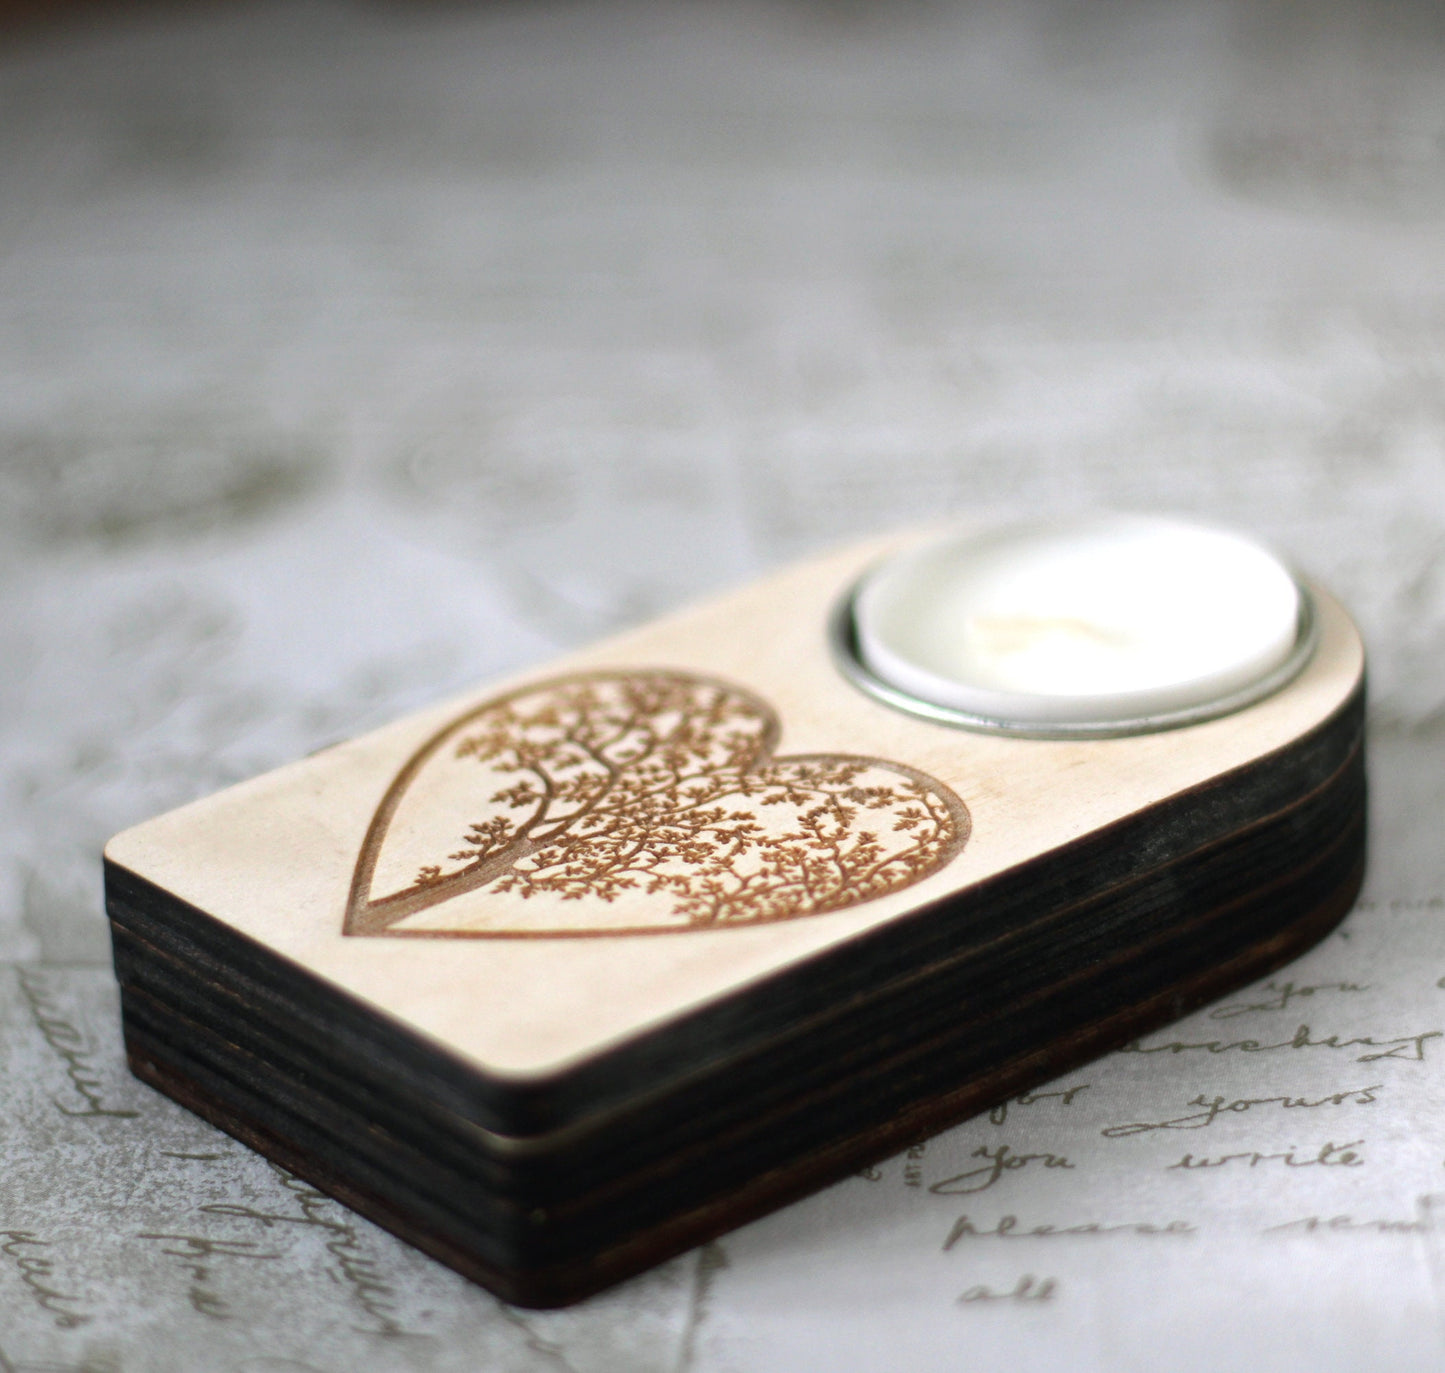 Engraved wooden candle holder with heart tree motif and secret compartment, it holds tea light candle or nightlight